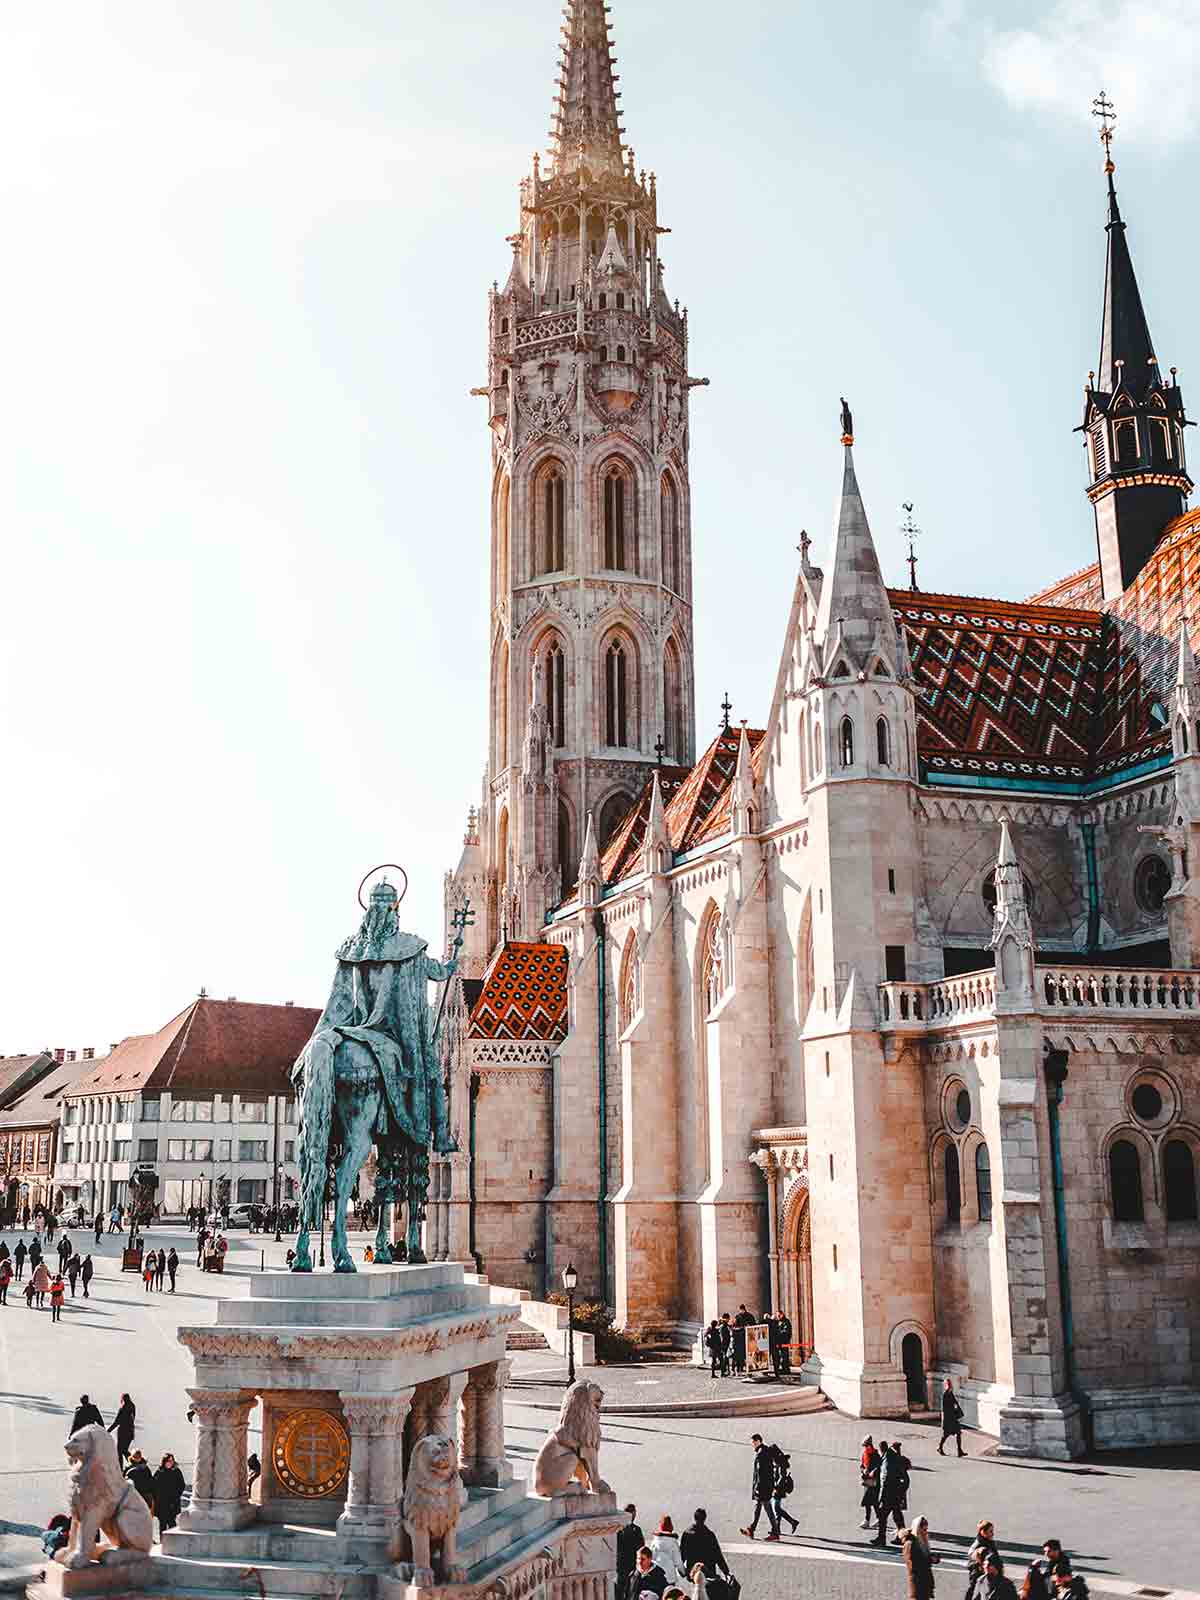 Matthias Church is located on the Buda side of Budapest just like Várkerület